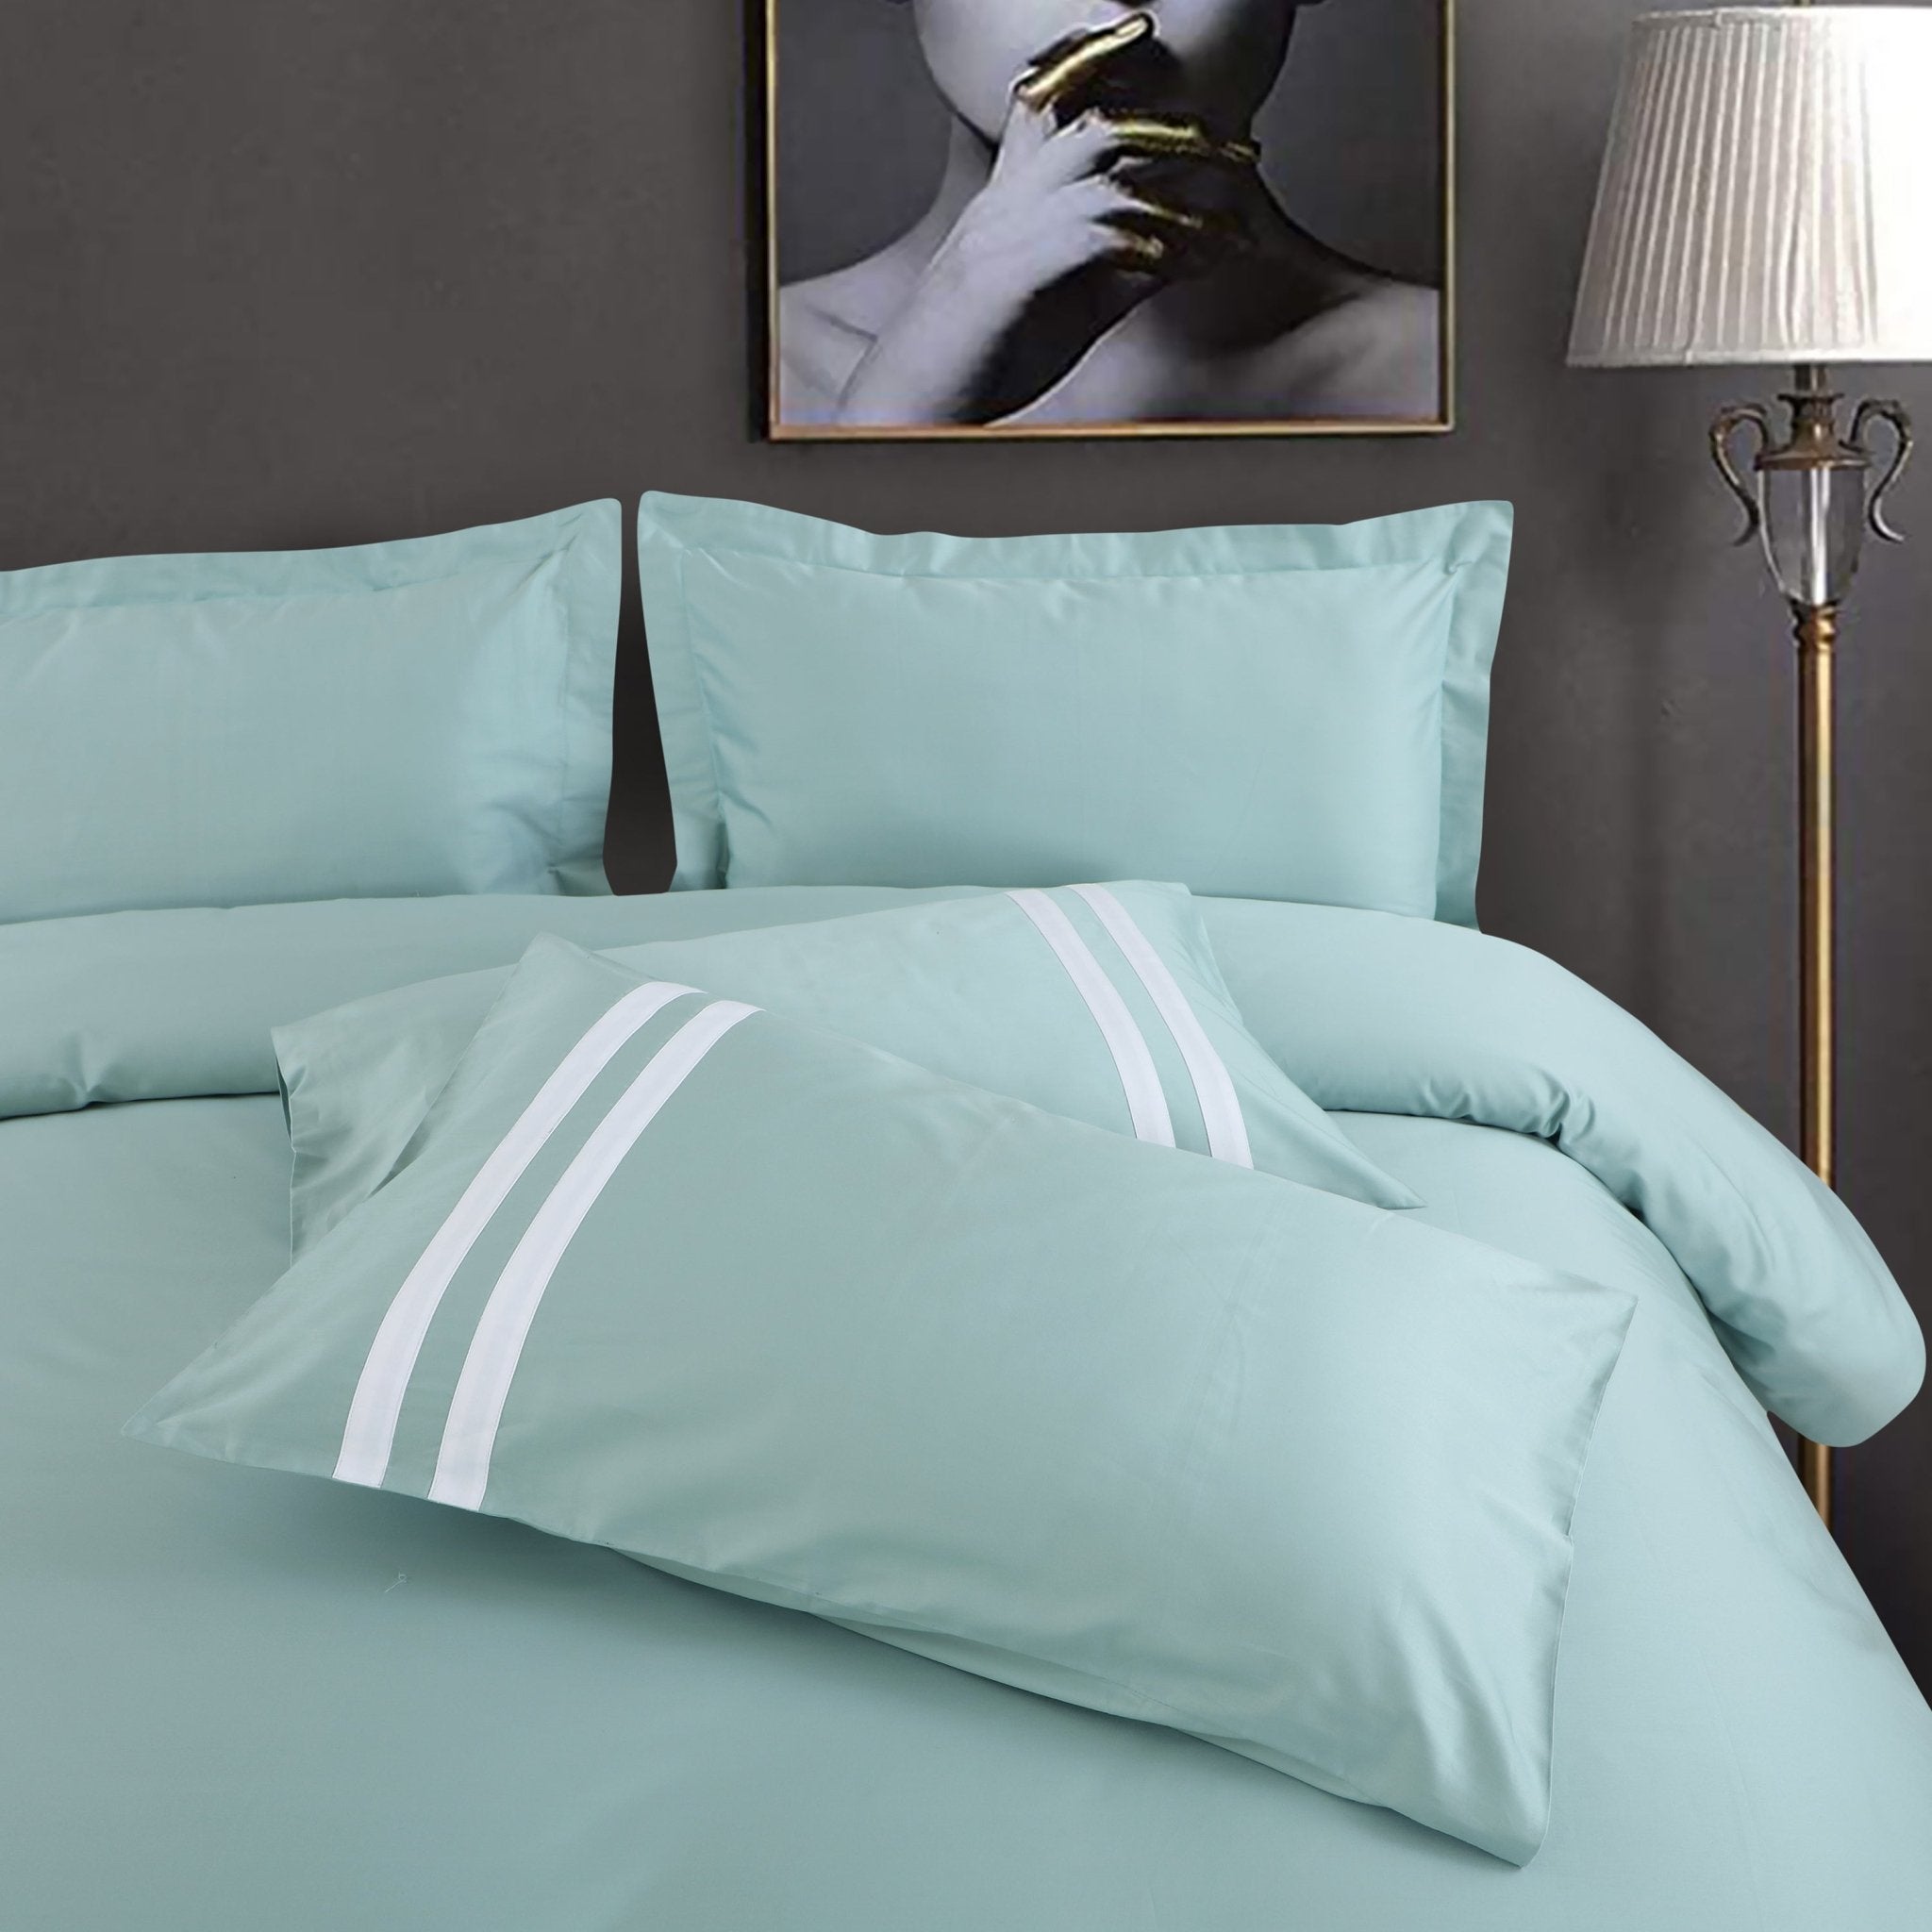 Malako Vivid Striped Solid Mint Green 500 TC King Size 100% Cotton Bed Sheet With 2 Plain Pillow Covers with Stripes - MALAKO